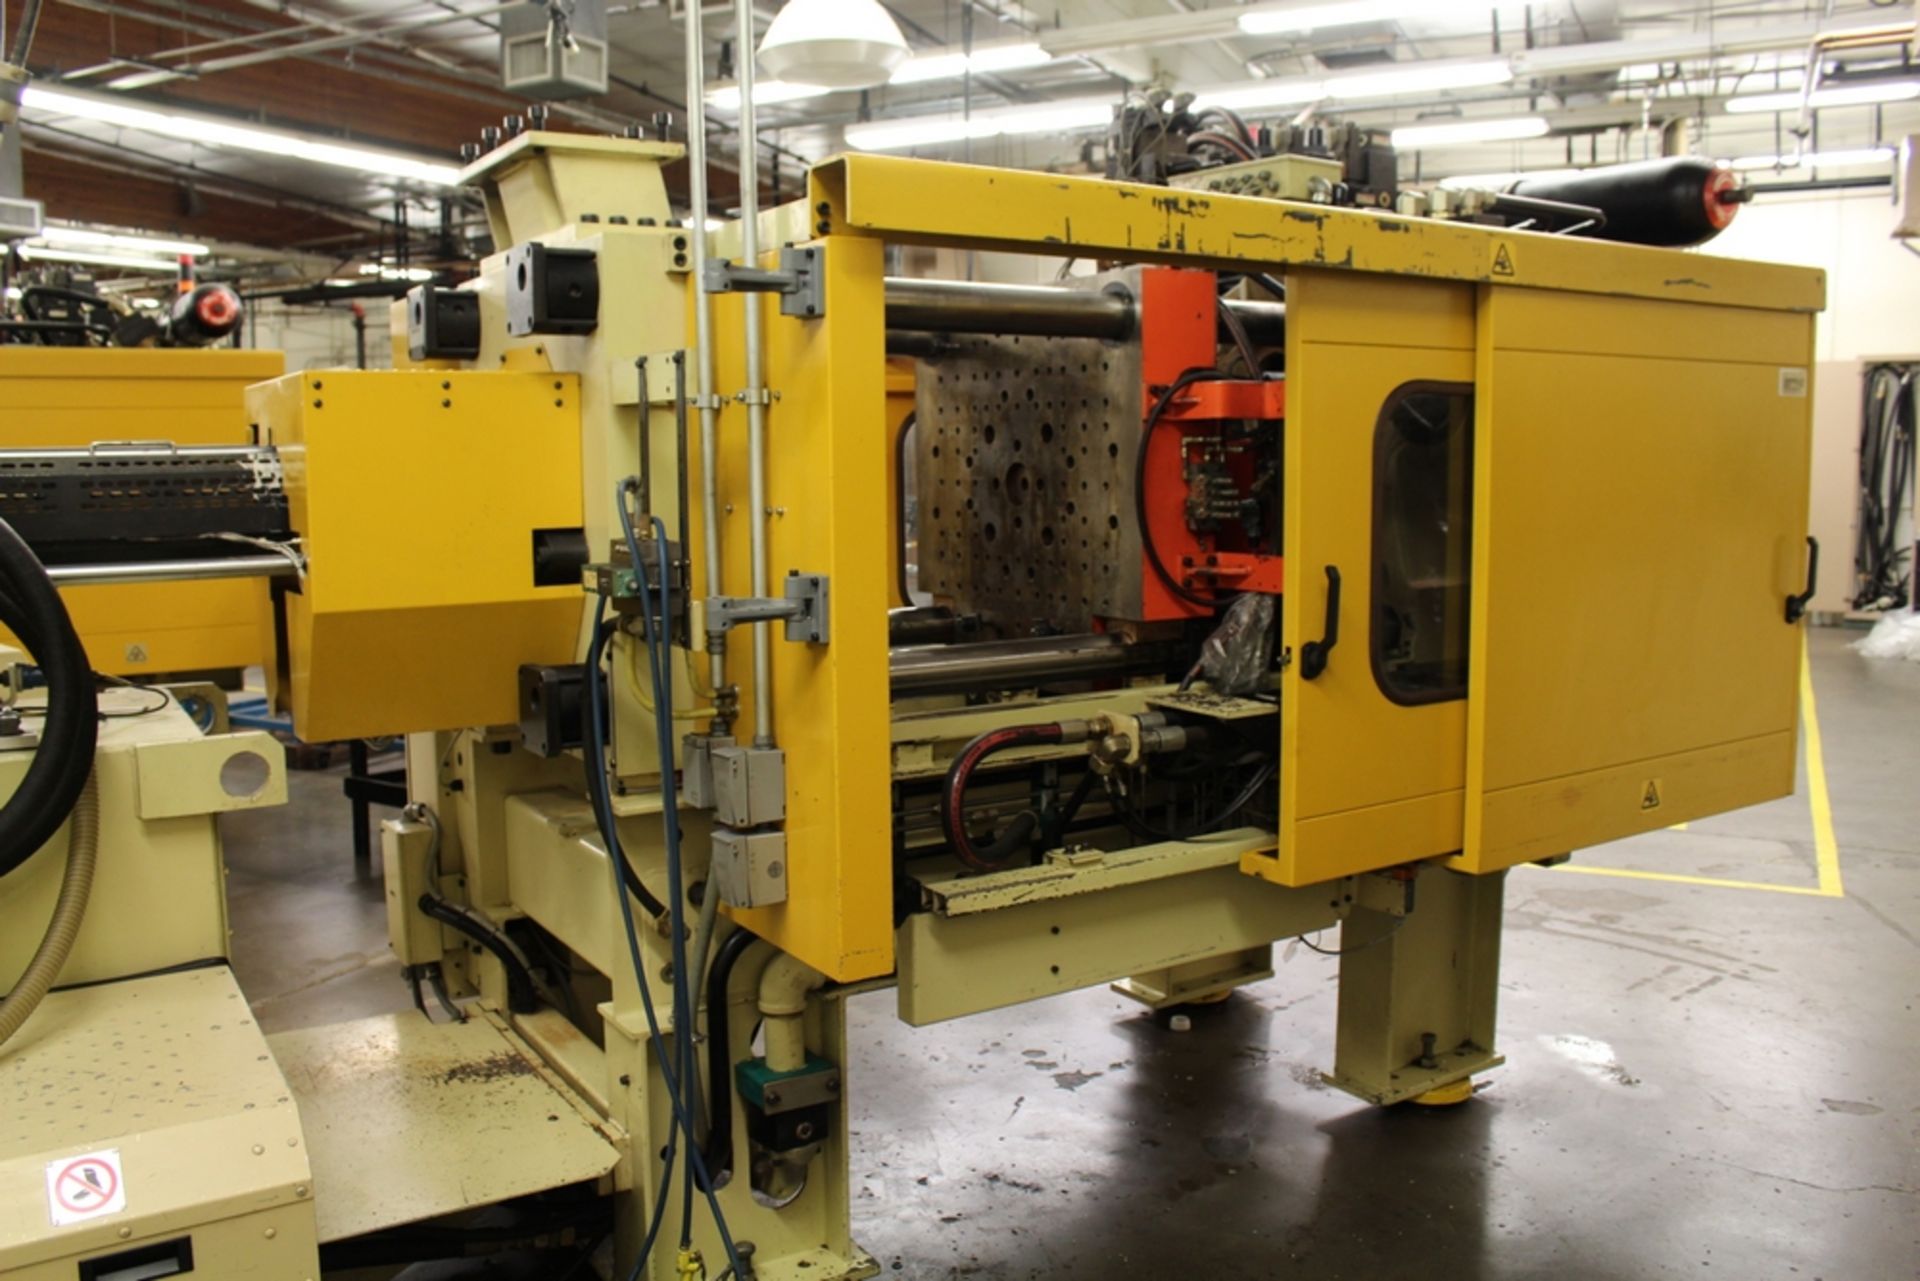 1995 HUSKY 225-TON INJECTION MOLDING MACHINE, MODEL G225GEN-RS50/50, S/N 11783, 36.5" X 36.5" - Image 6 of 6